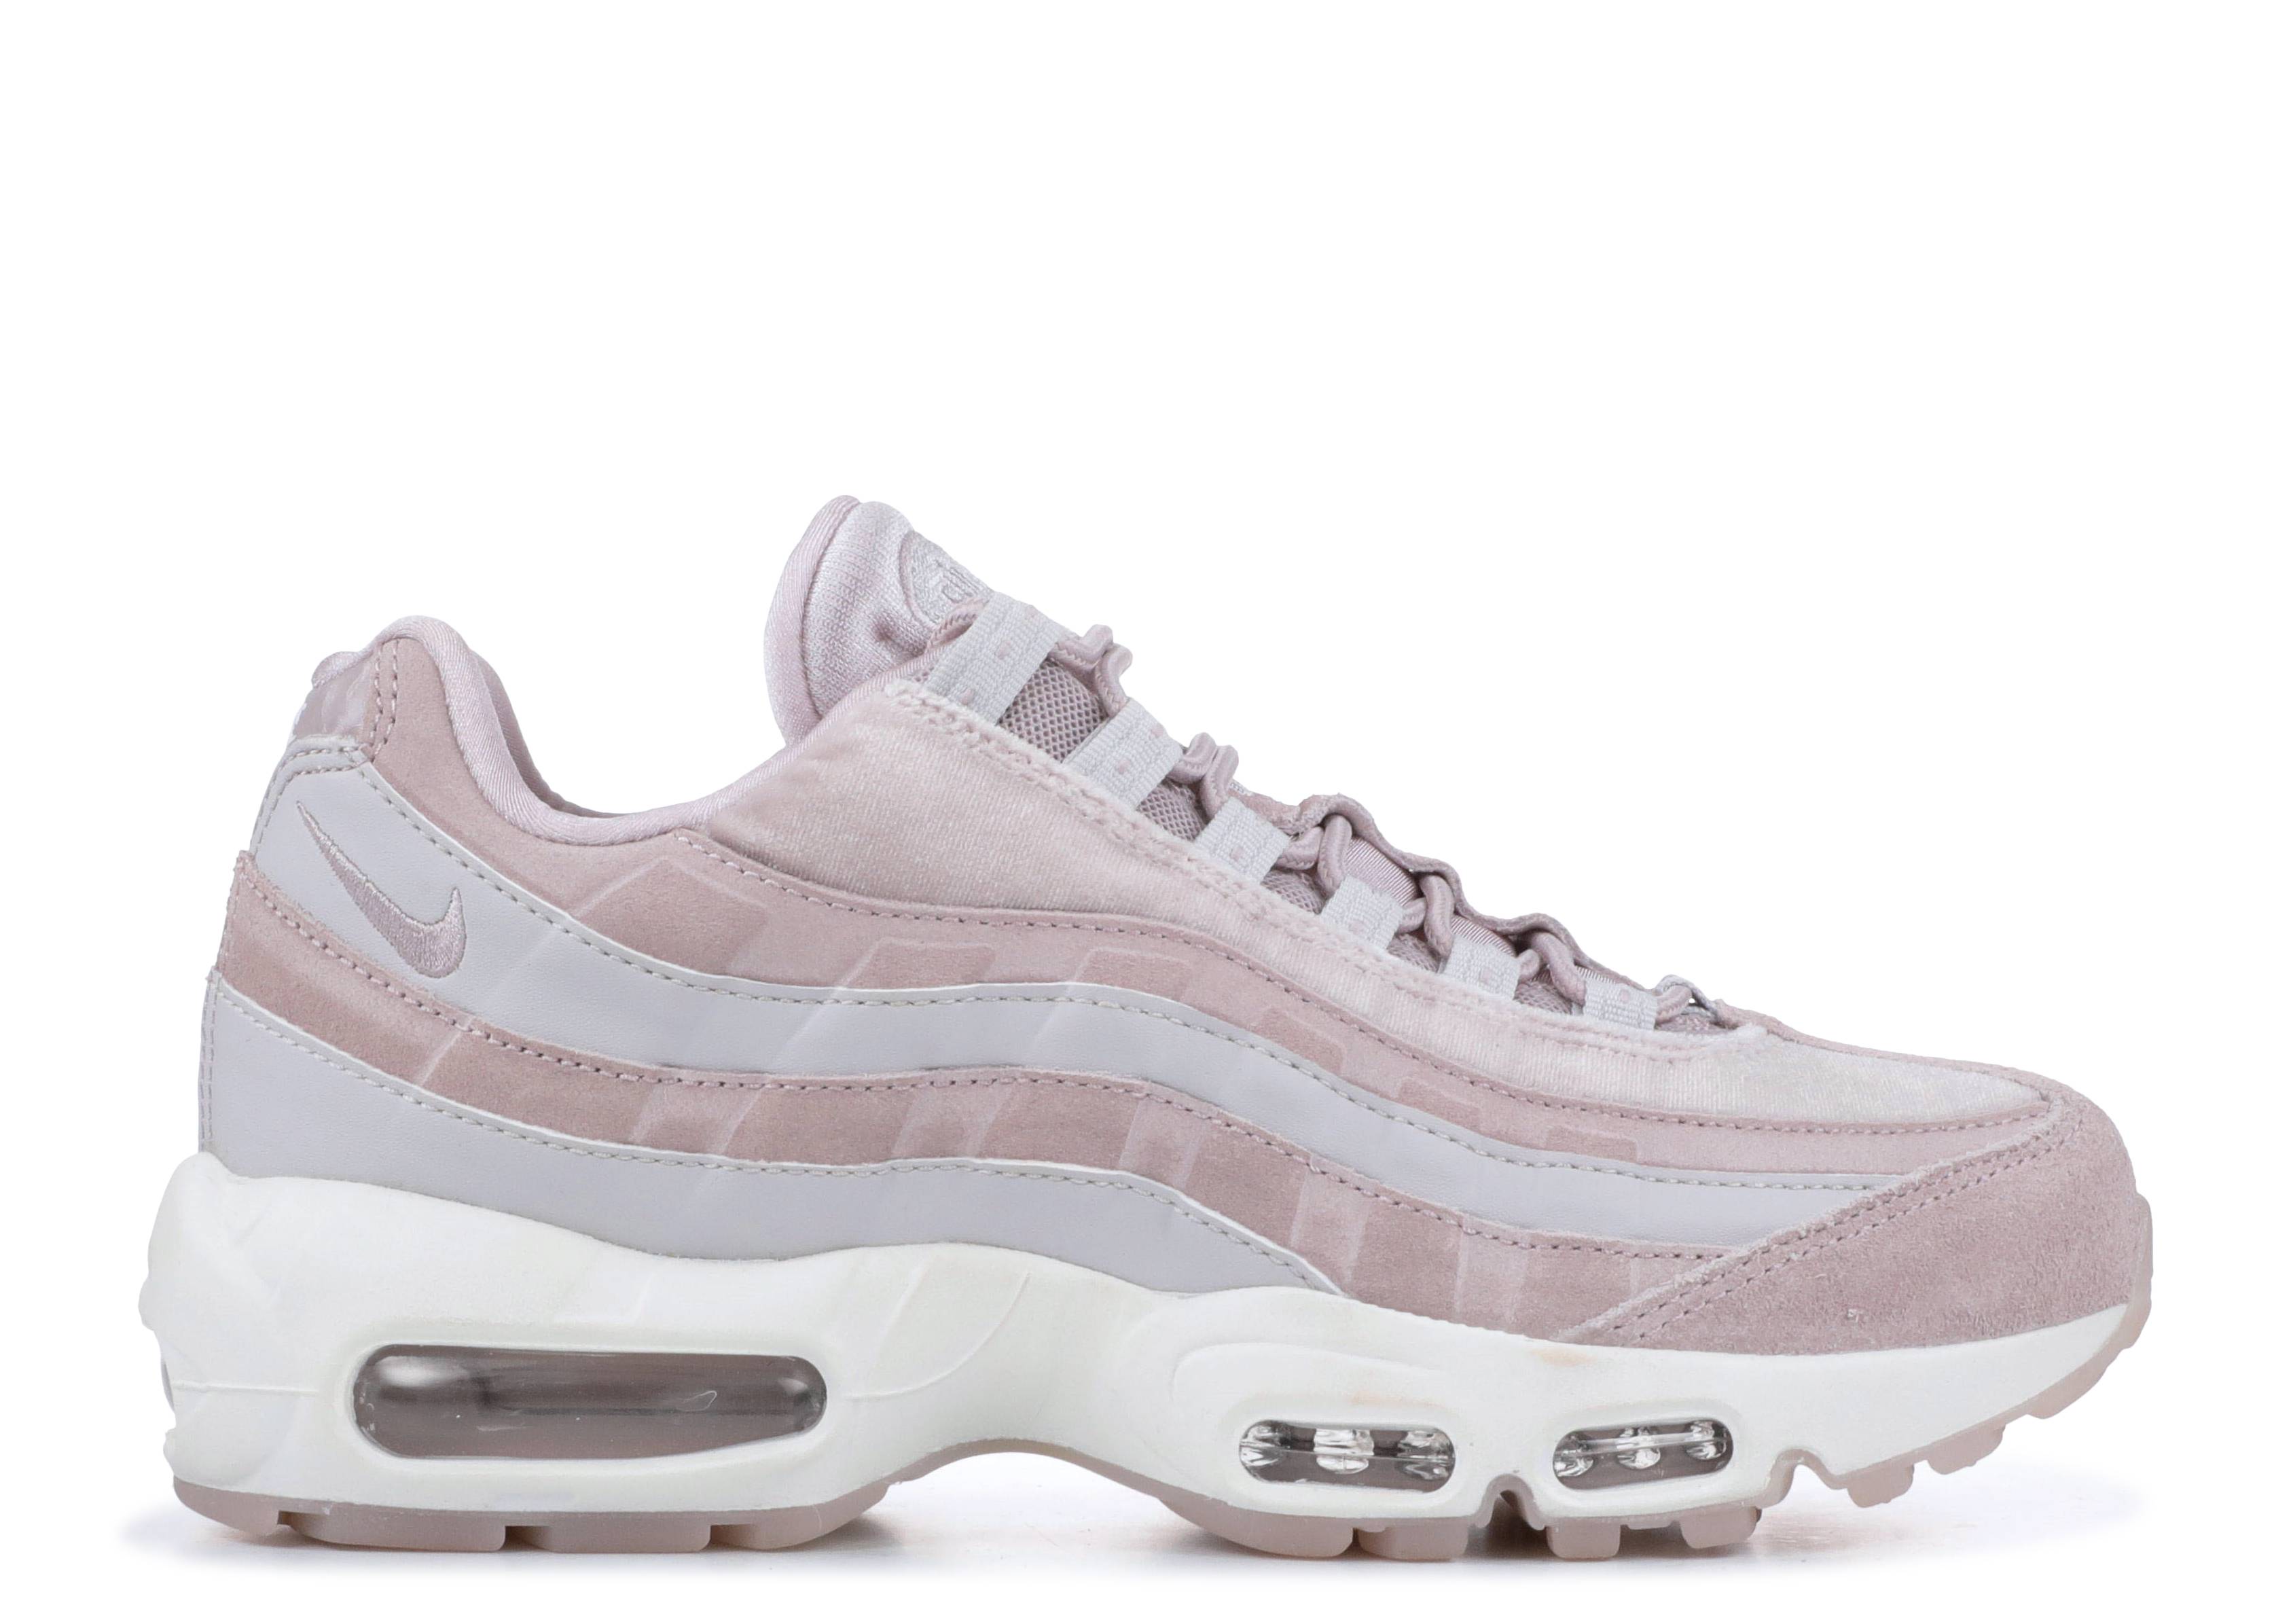 Wmns Air Max 95 LX 'Particle Rose'